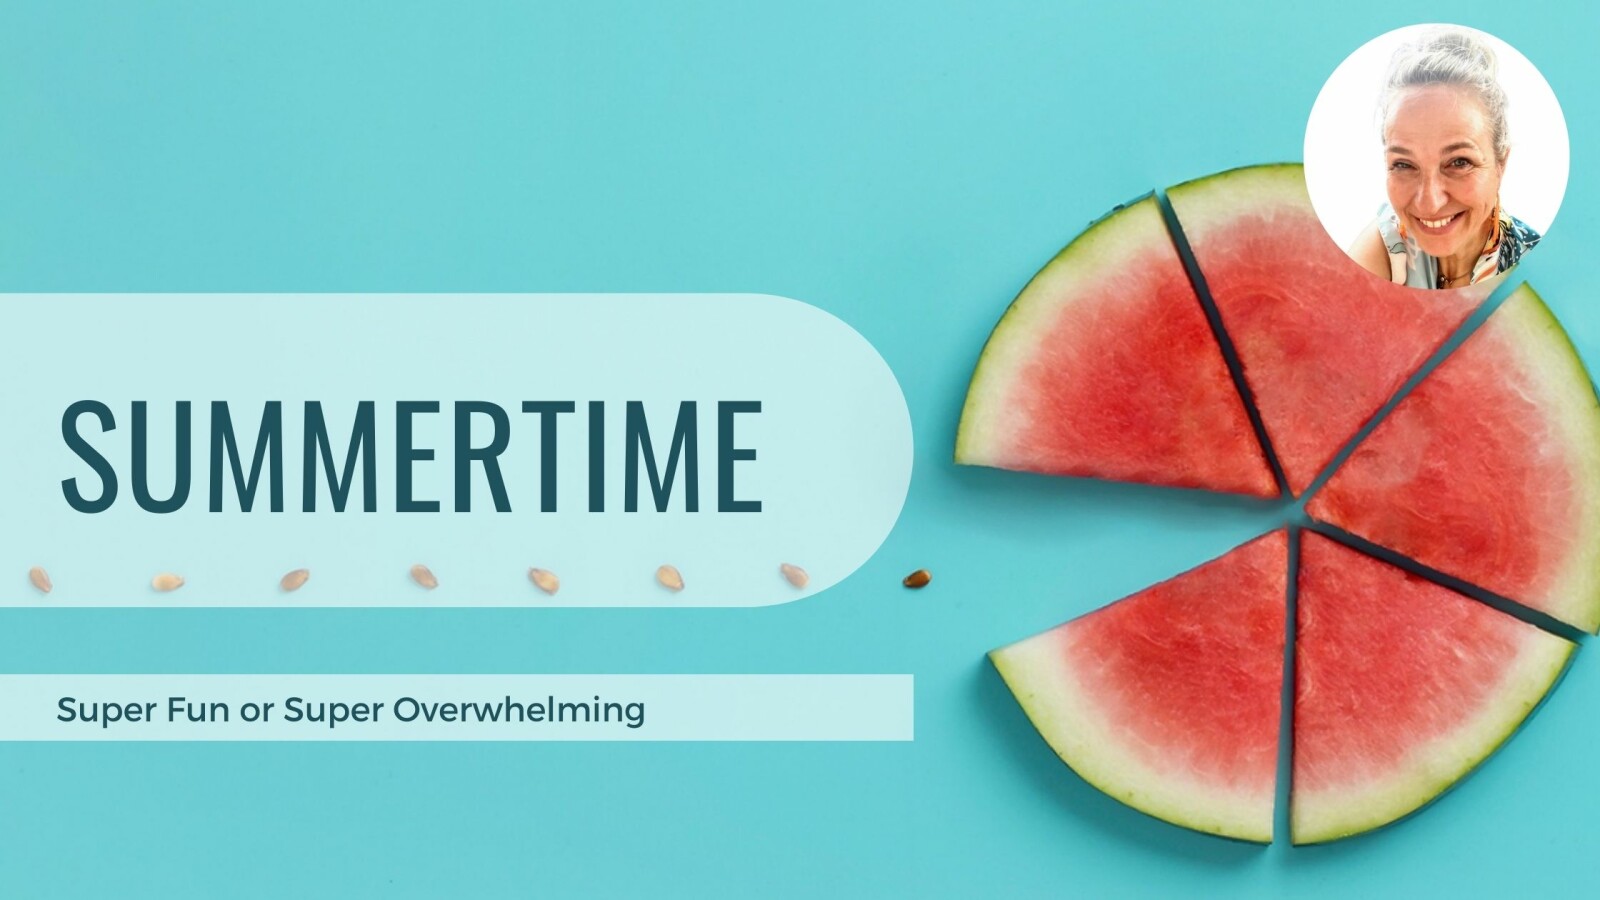 Summertime: super fun or super overwhelming? And how you can get over it!